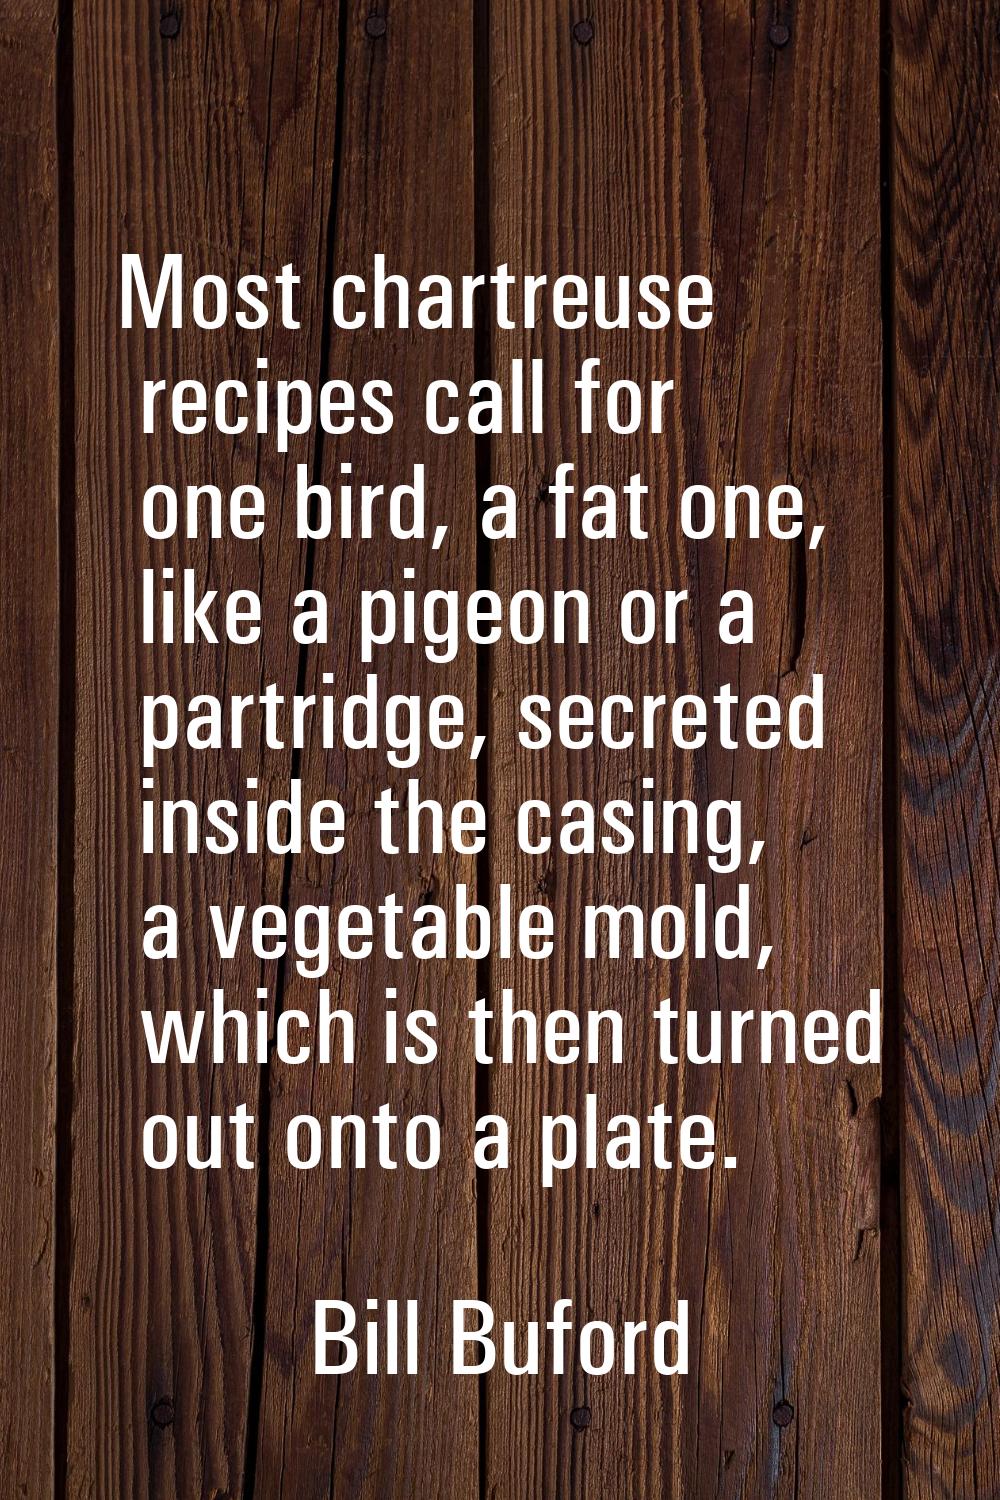 Most chartreuse recipes call for one bird, a fat one, like a pigeon or a partridge, secreted inside